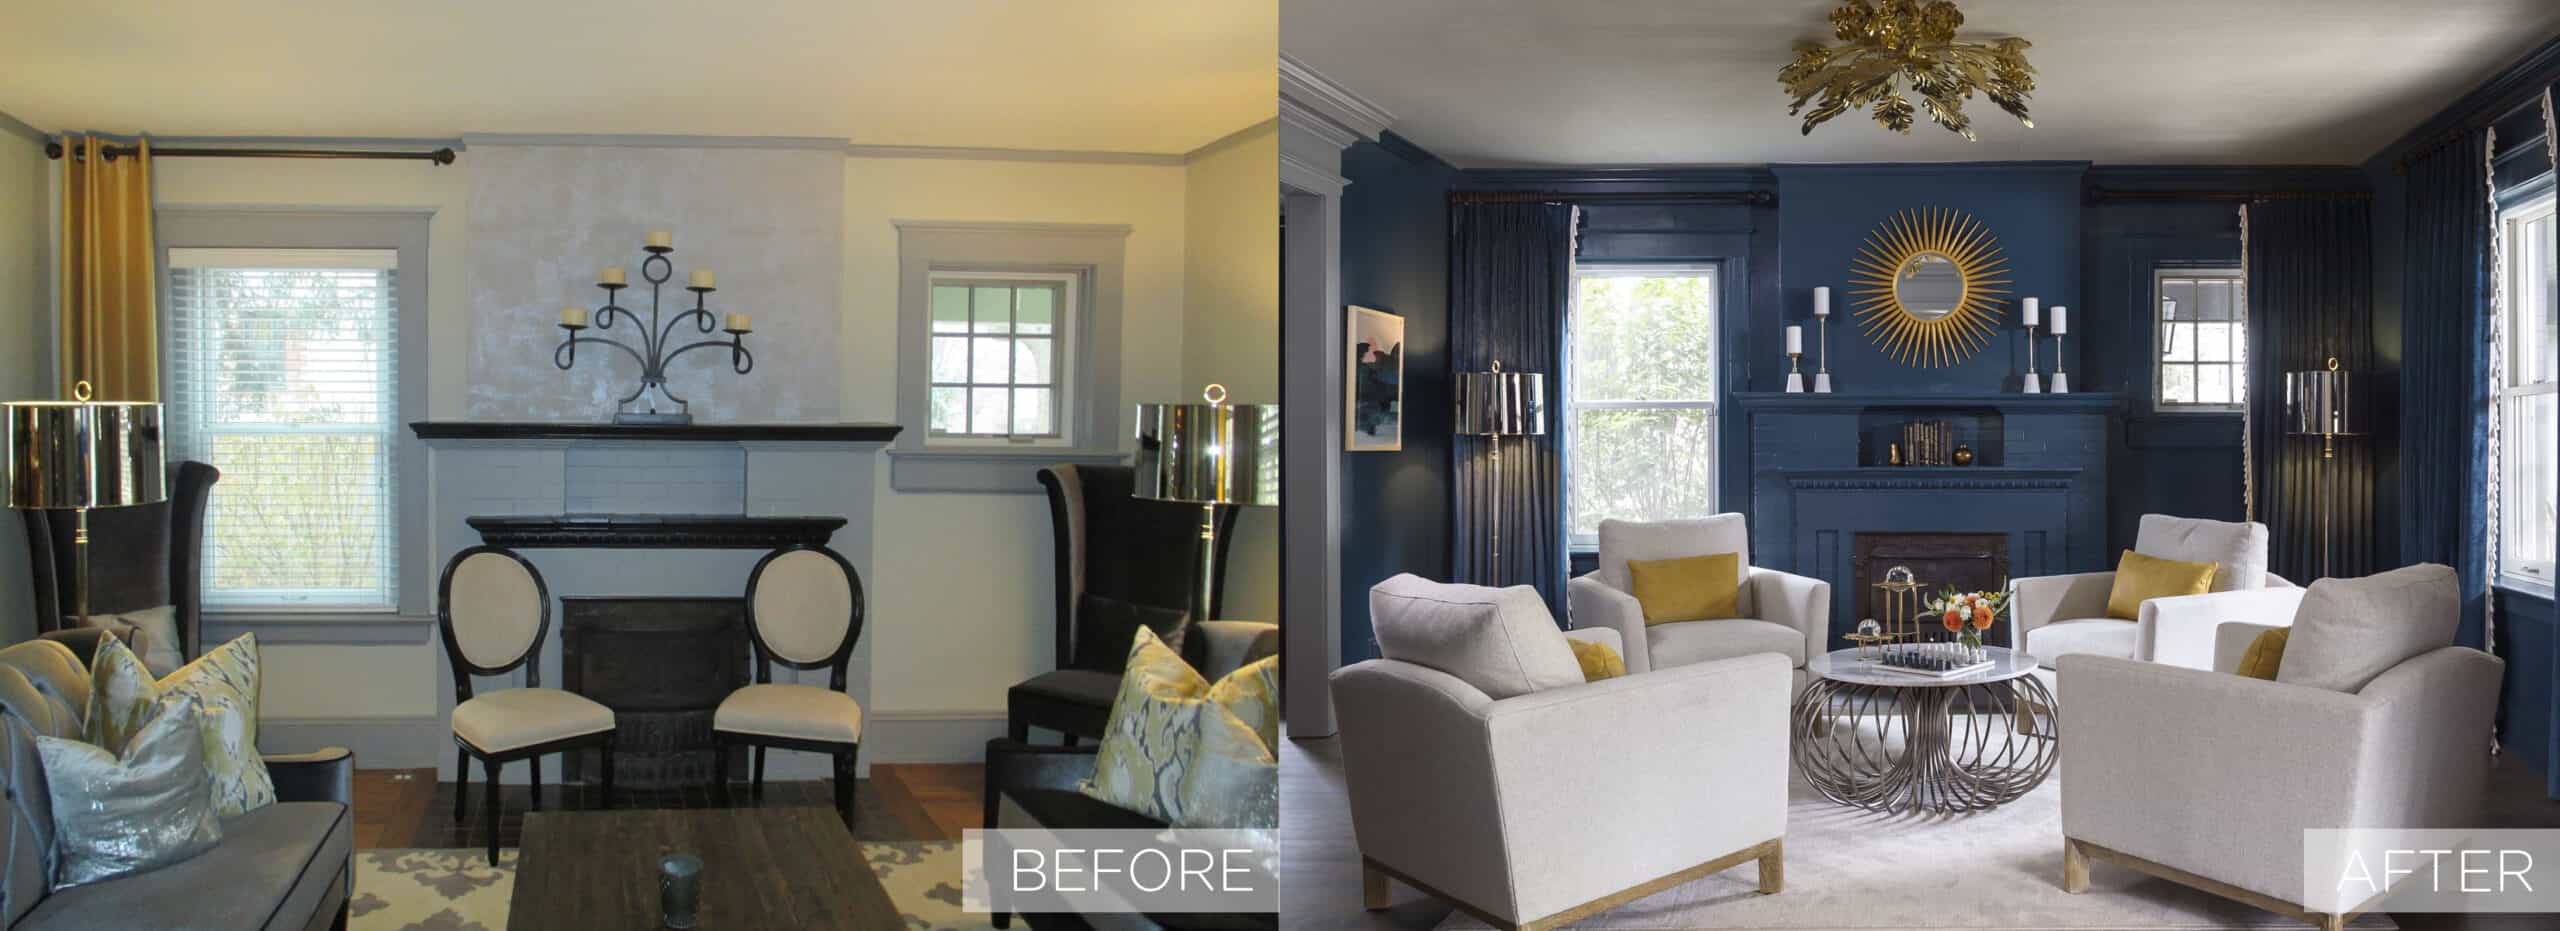 Before and After Why You Shouldn't DIY Home Decorating and Design Projects Duet Design Group Denver Colorado V1